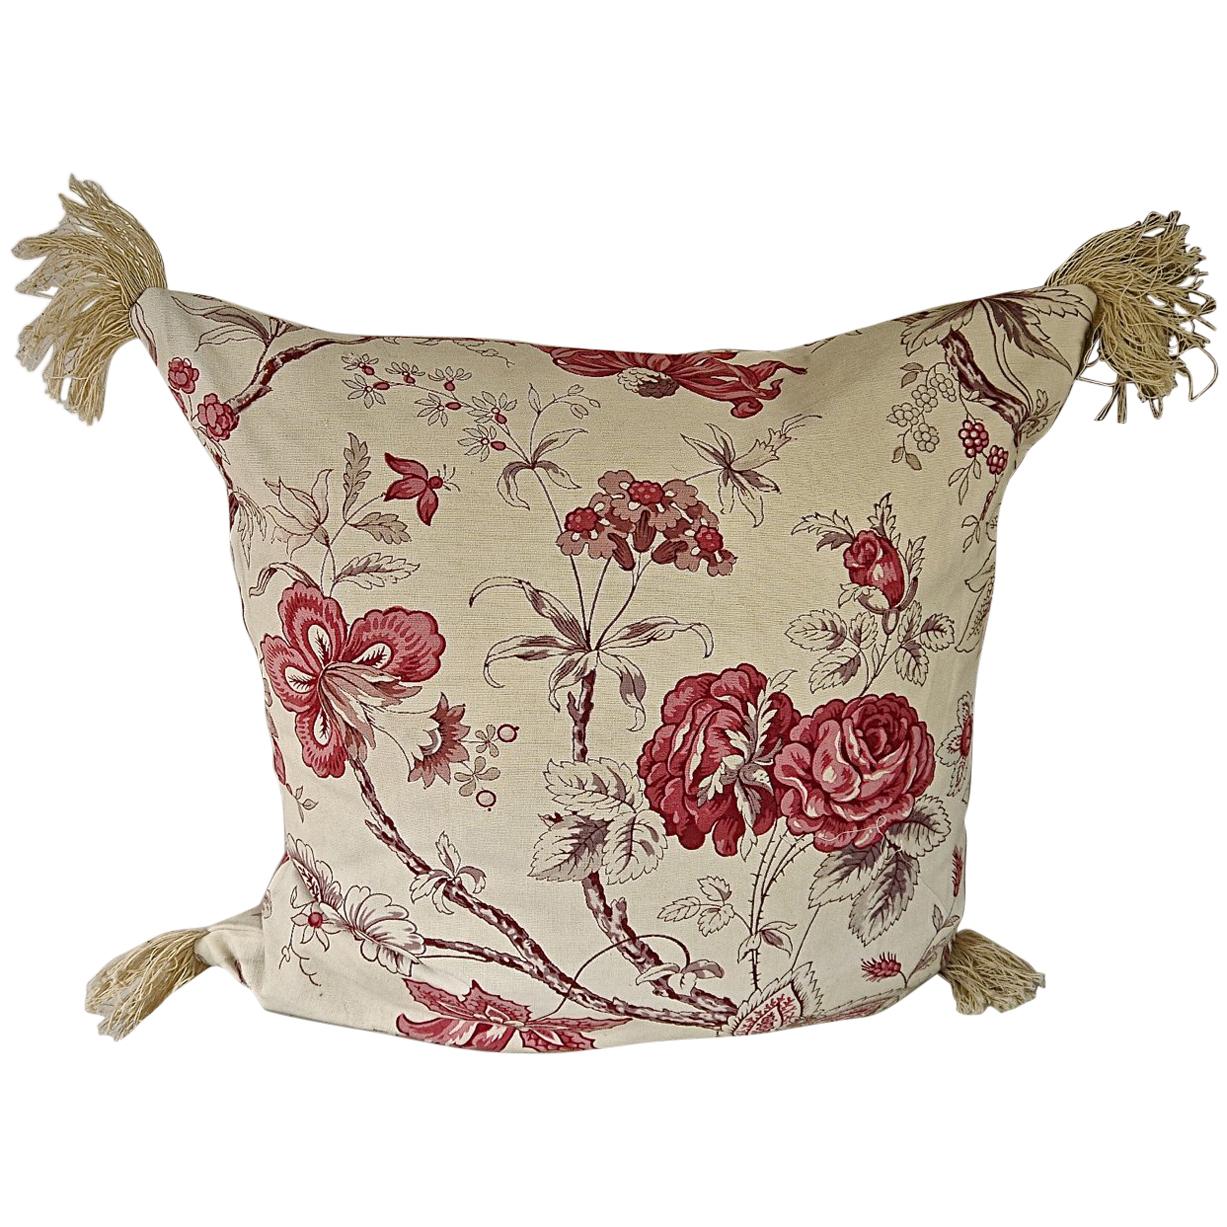 Pink Roses and Flowers Cotton Cushion, French, Early 20th Century